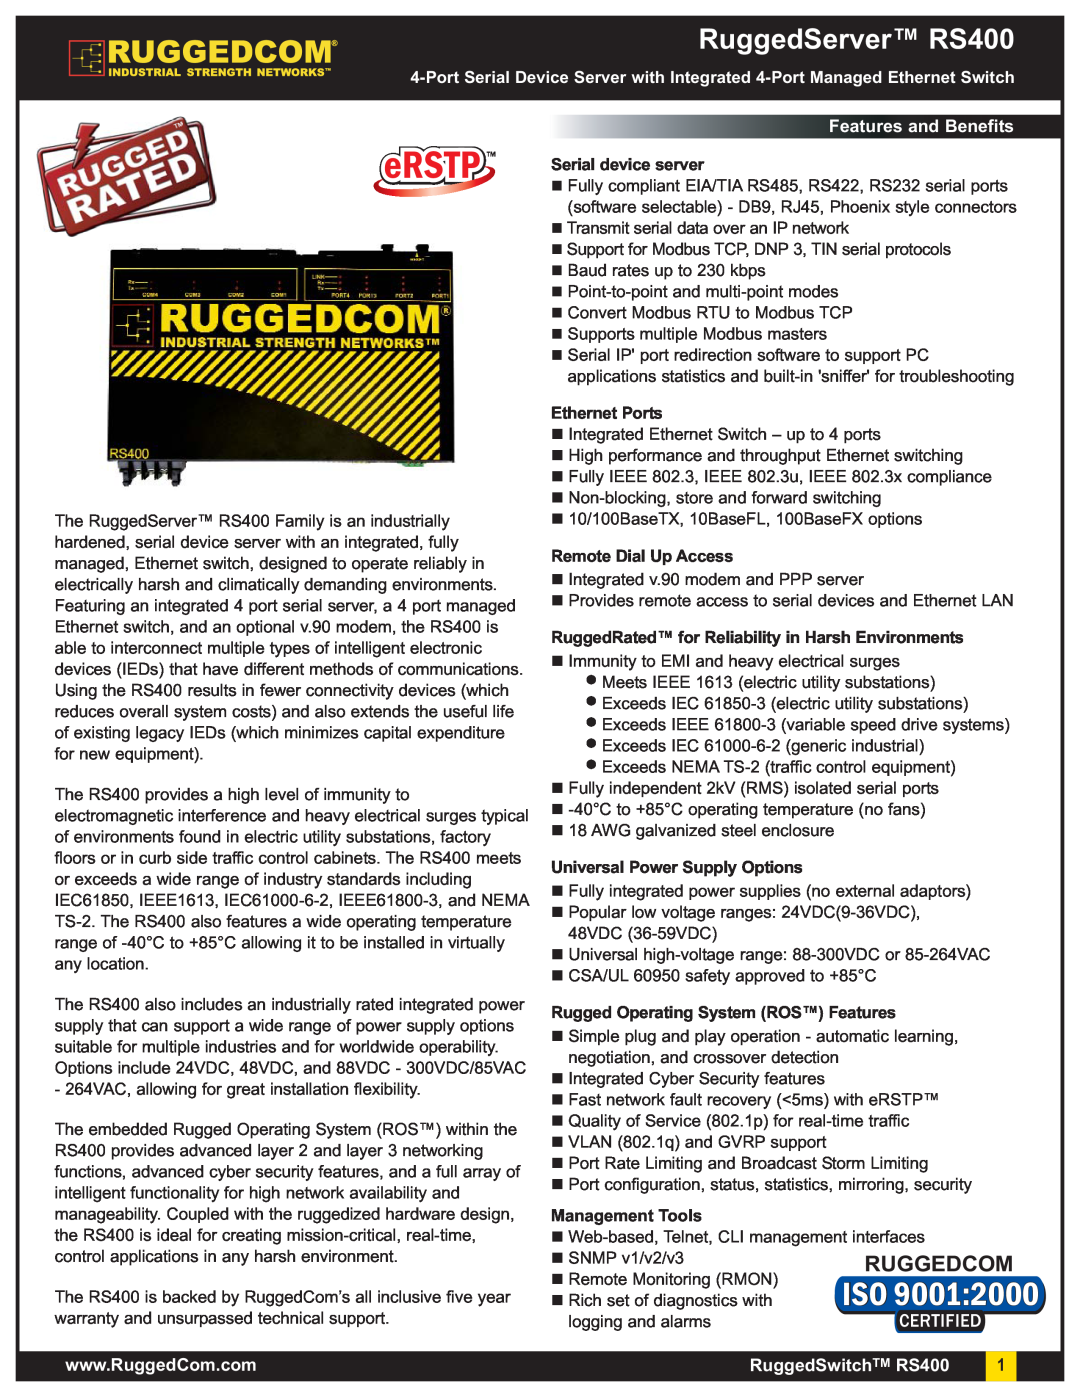 RuggedCom warranty RuggedServer RS400, Features and Benefits, Serial device server, Ethernet Ports, Management Tools 